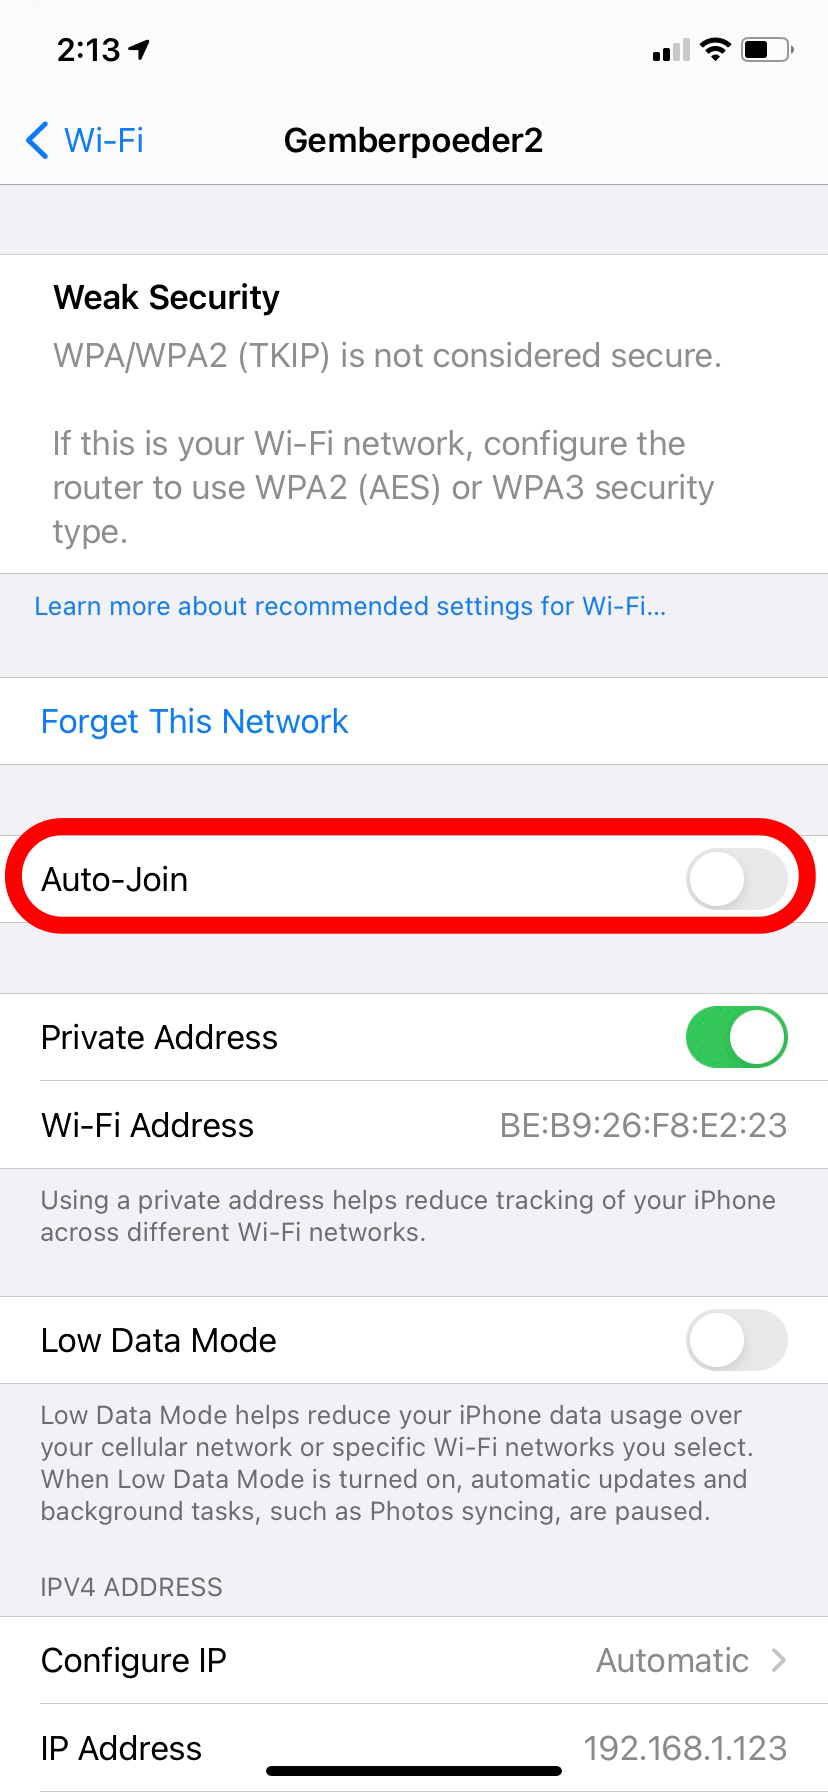 How to Stop Auto-Joining Wi-Fi on the iPhone